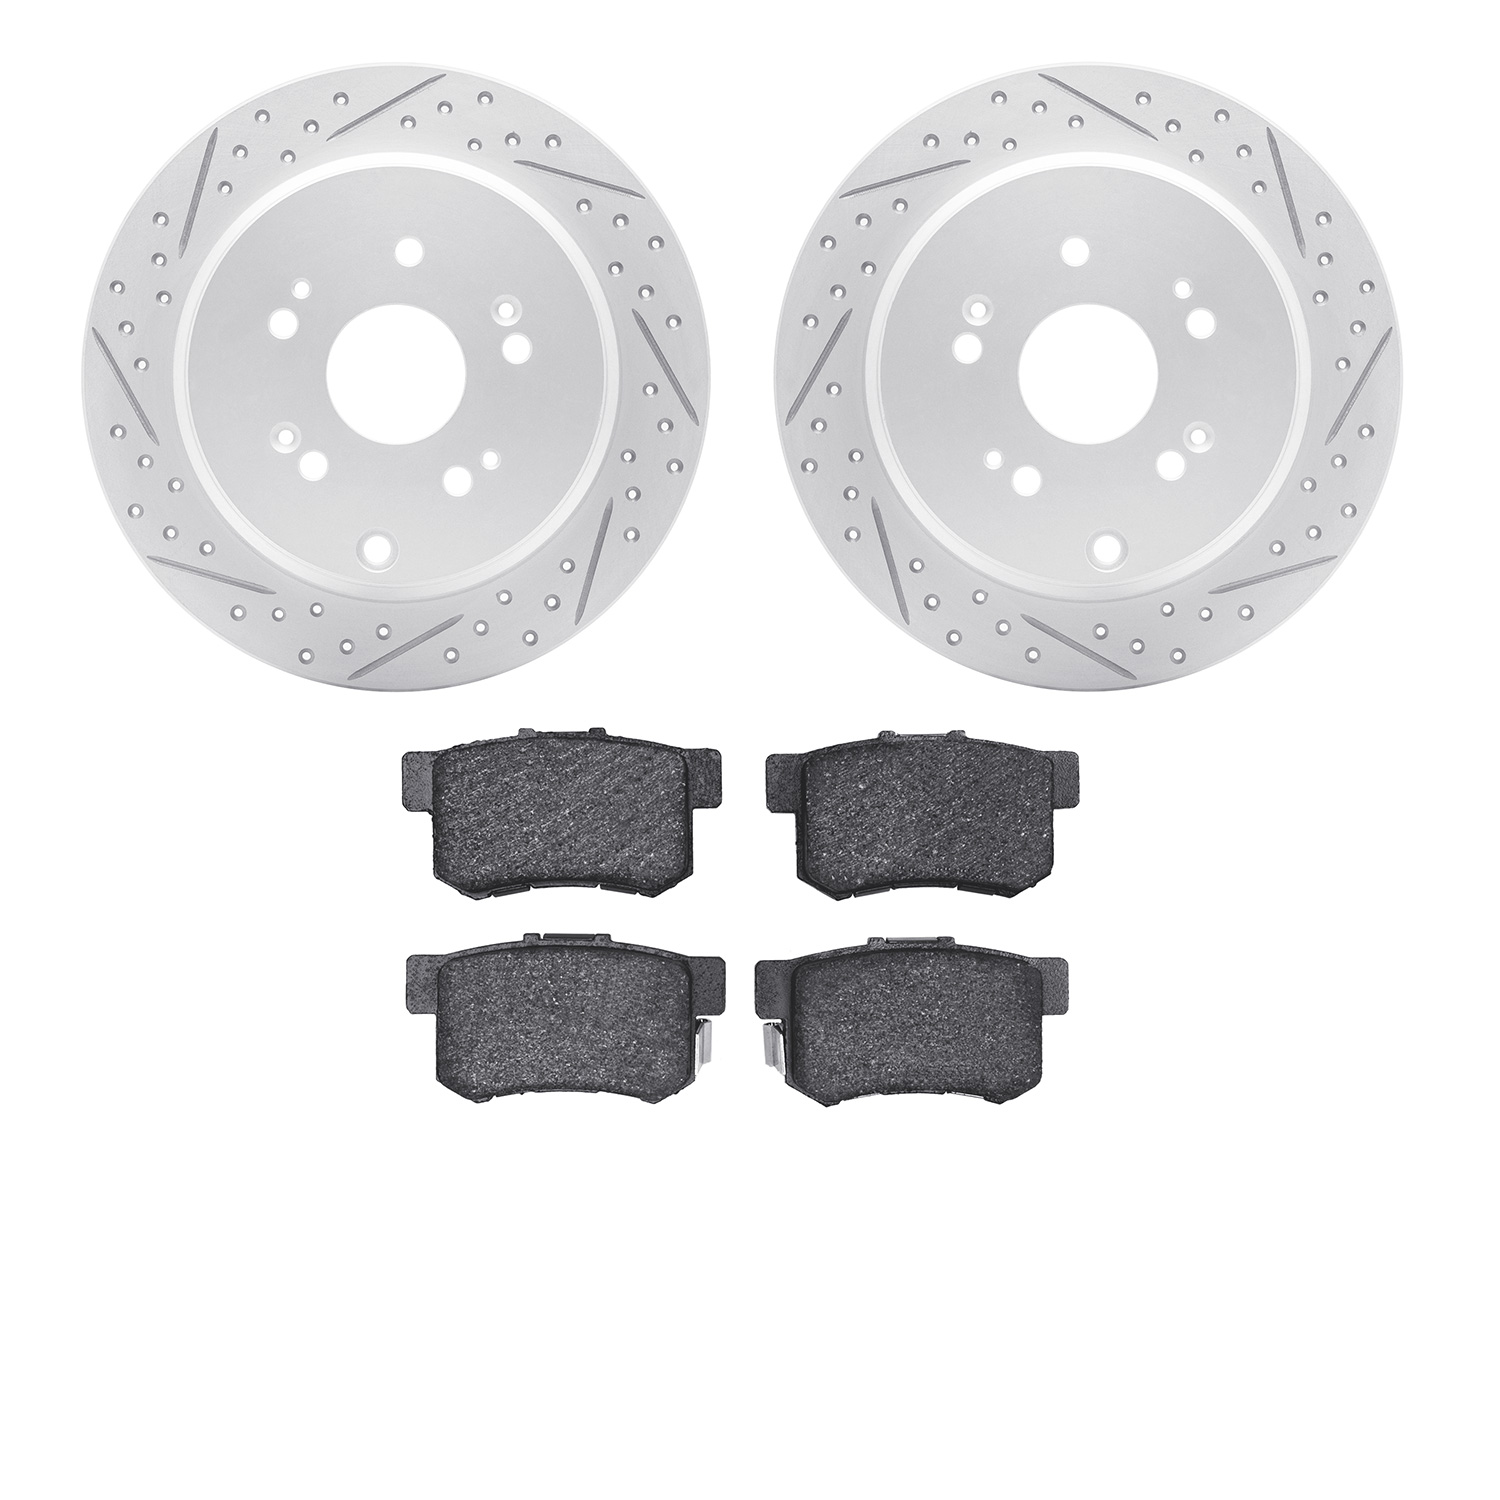 2502-59064 Geoperformance Drilled/Slotted Rotors w/5000 Advanced Brake Pads Kit, 2007-2012 Acura/Honda, Position: Rear